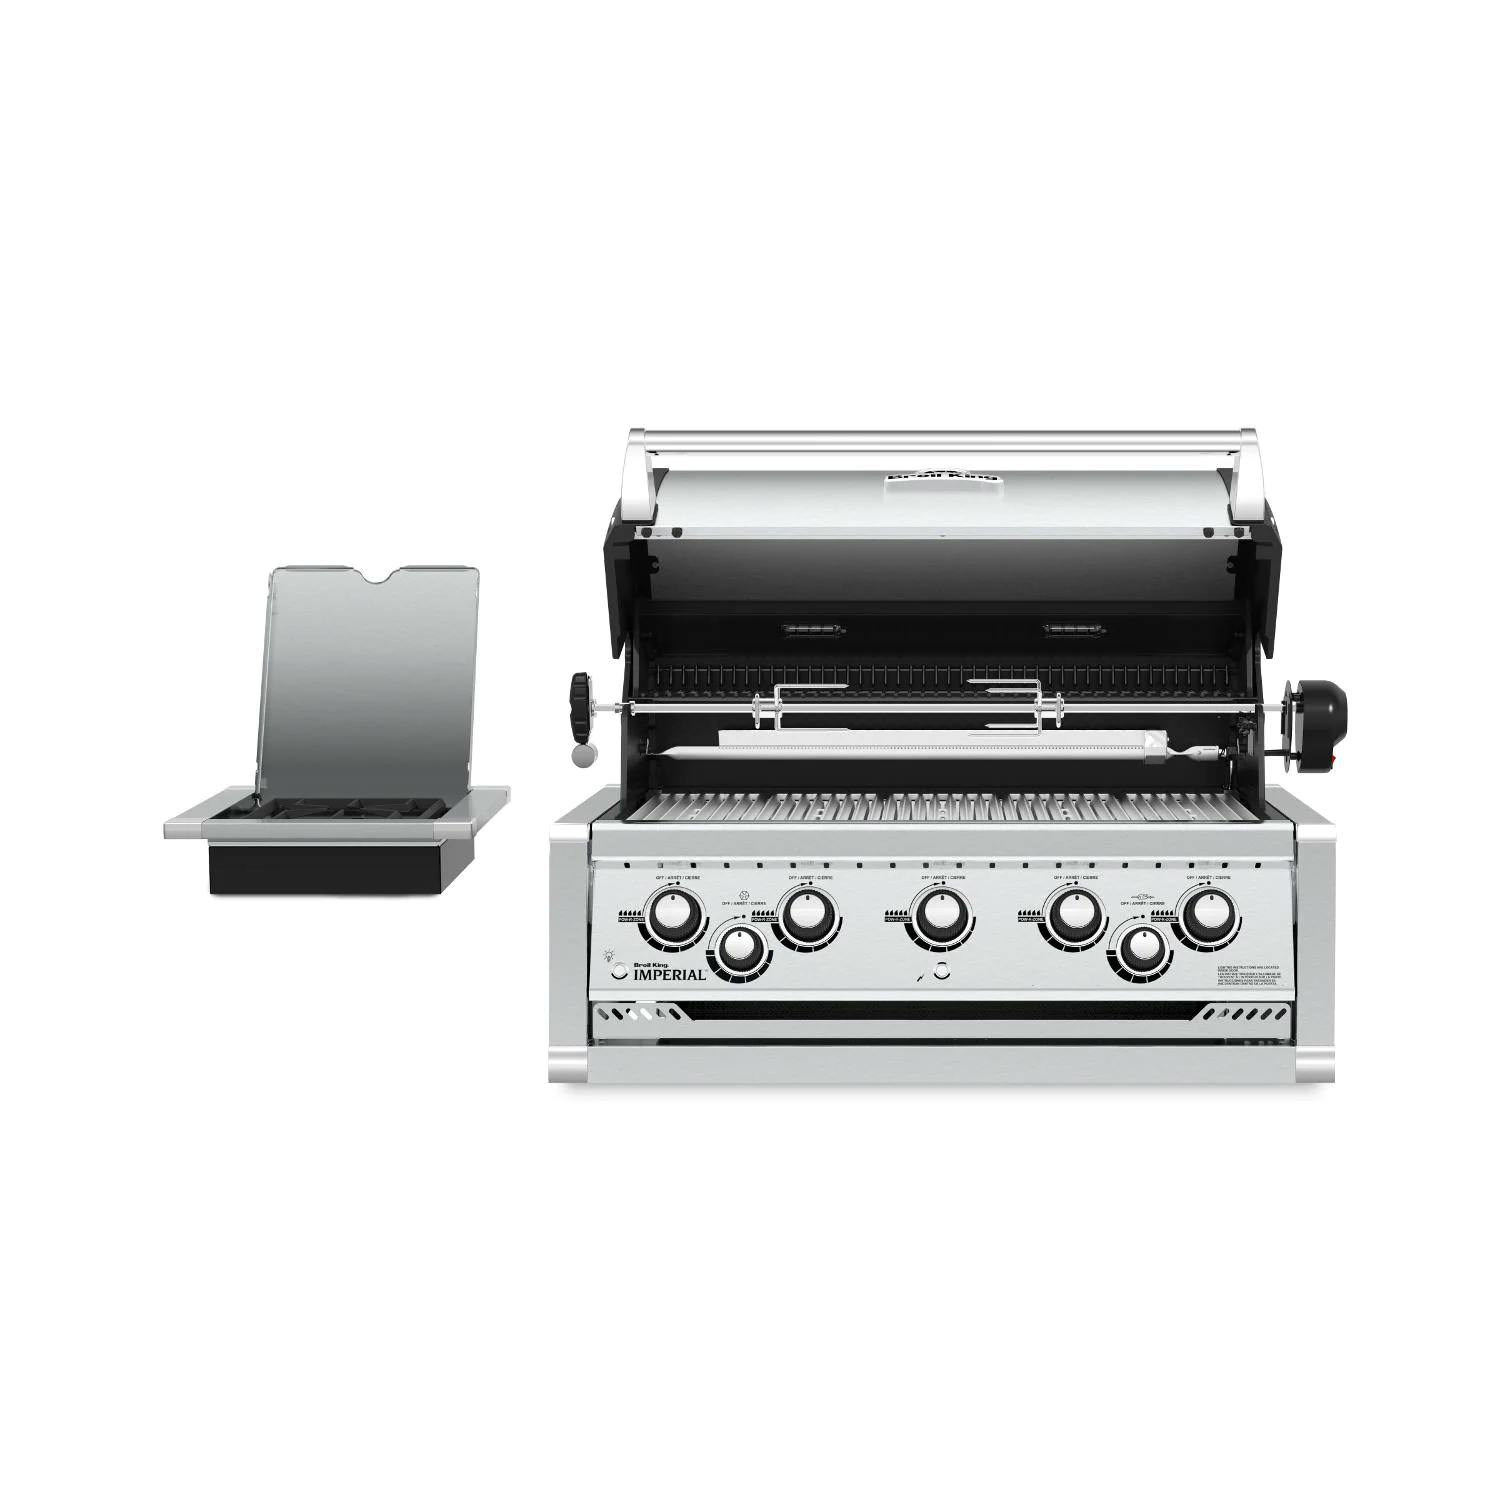 Broil King Imperial 590 Built-in Gas Grill with Rotisserie and Side Burner